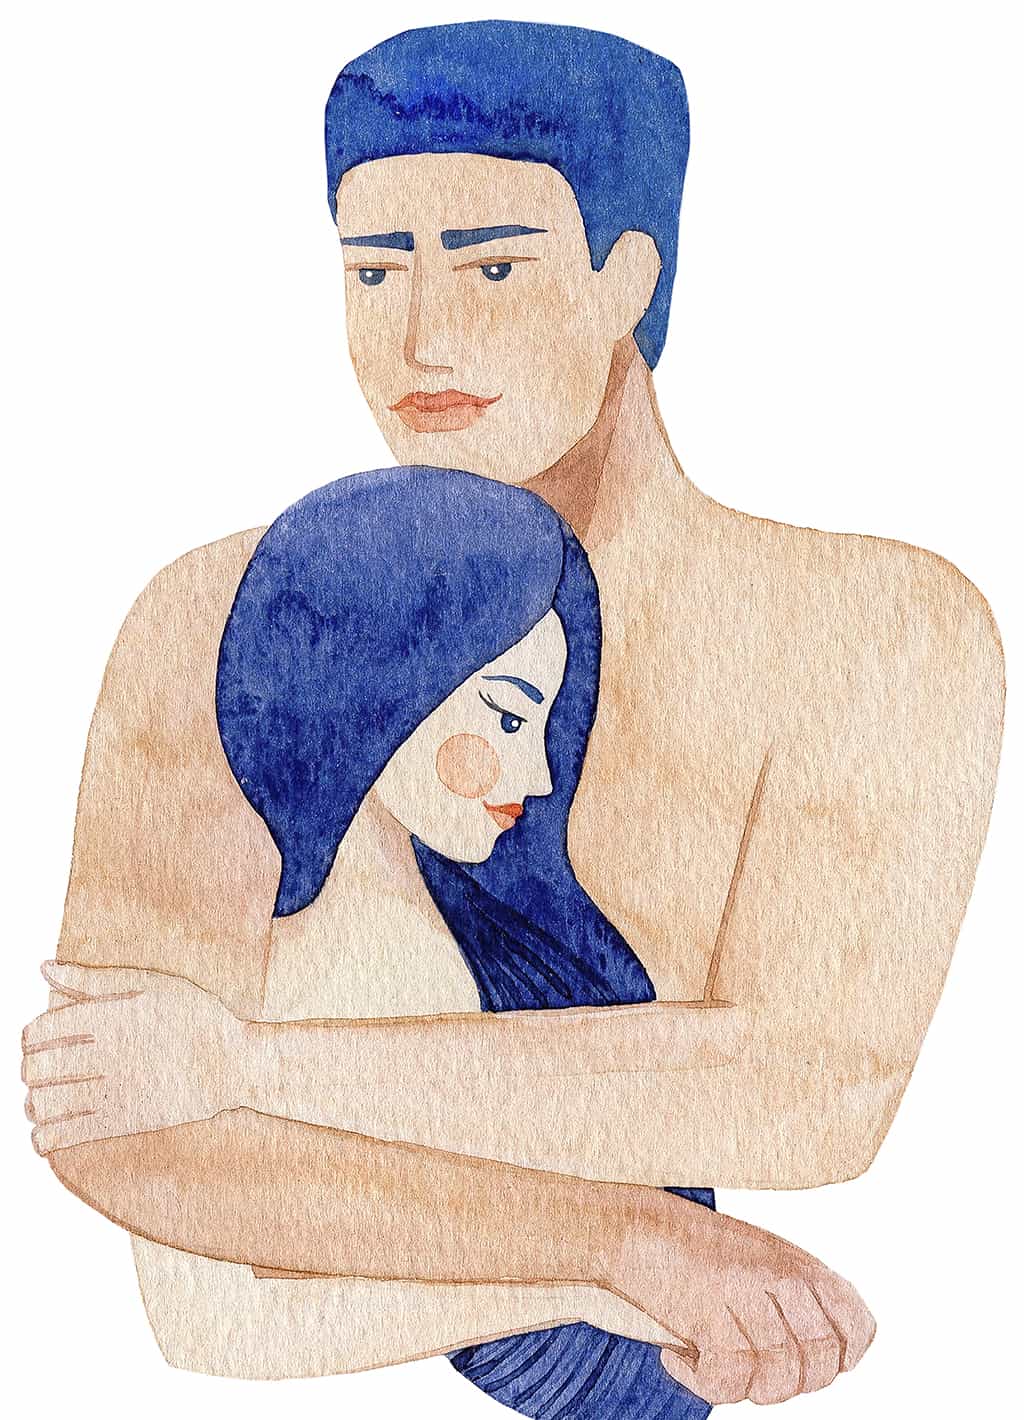 Watercolor Illustration Of A Couple With The Man Holding The Woman From Behind Signifying A Sexless Relationship